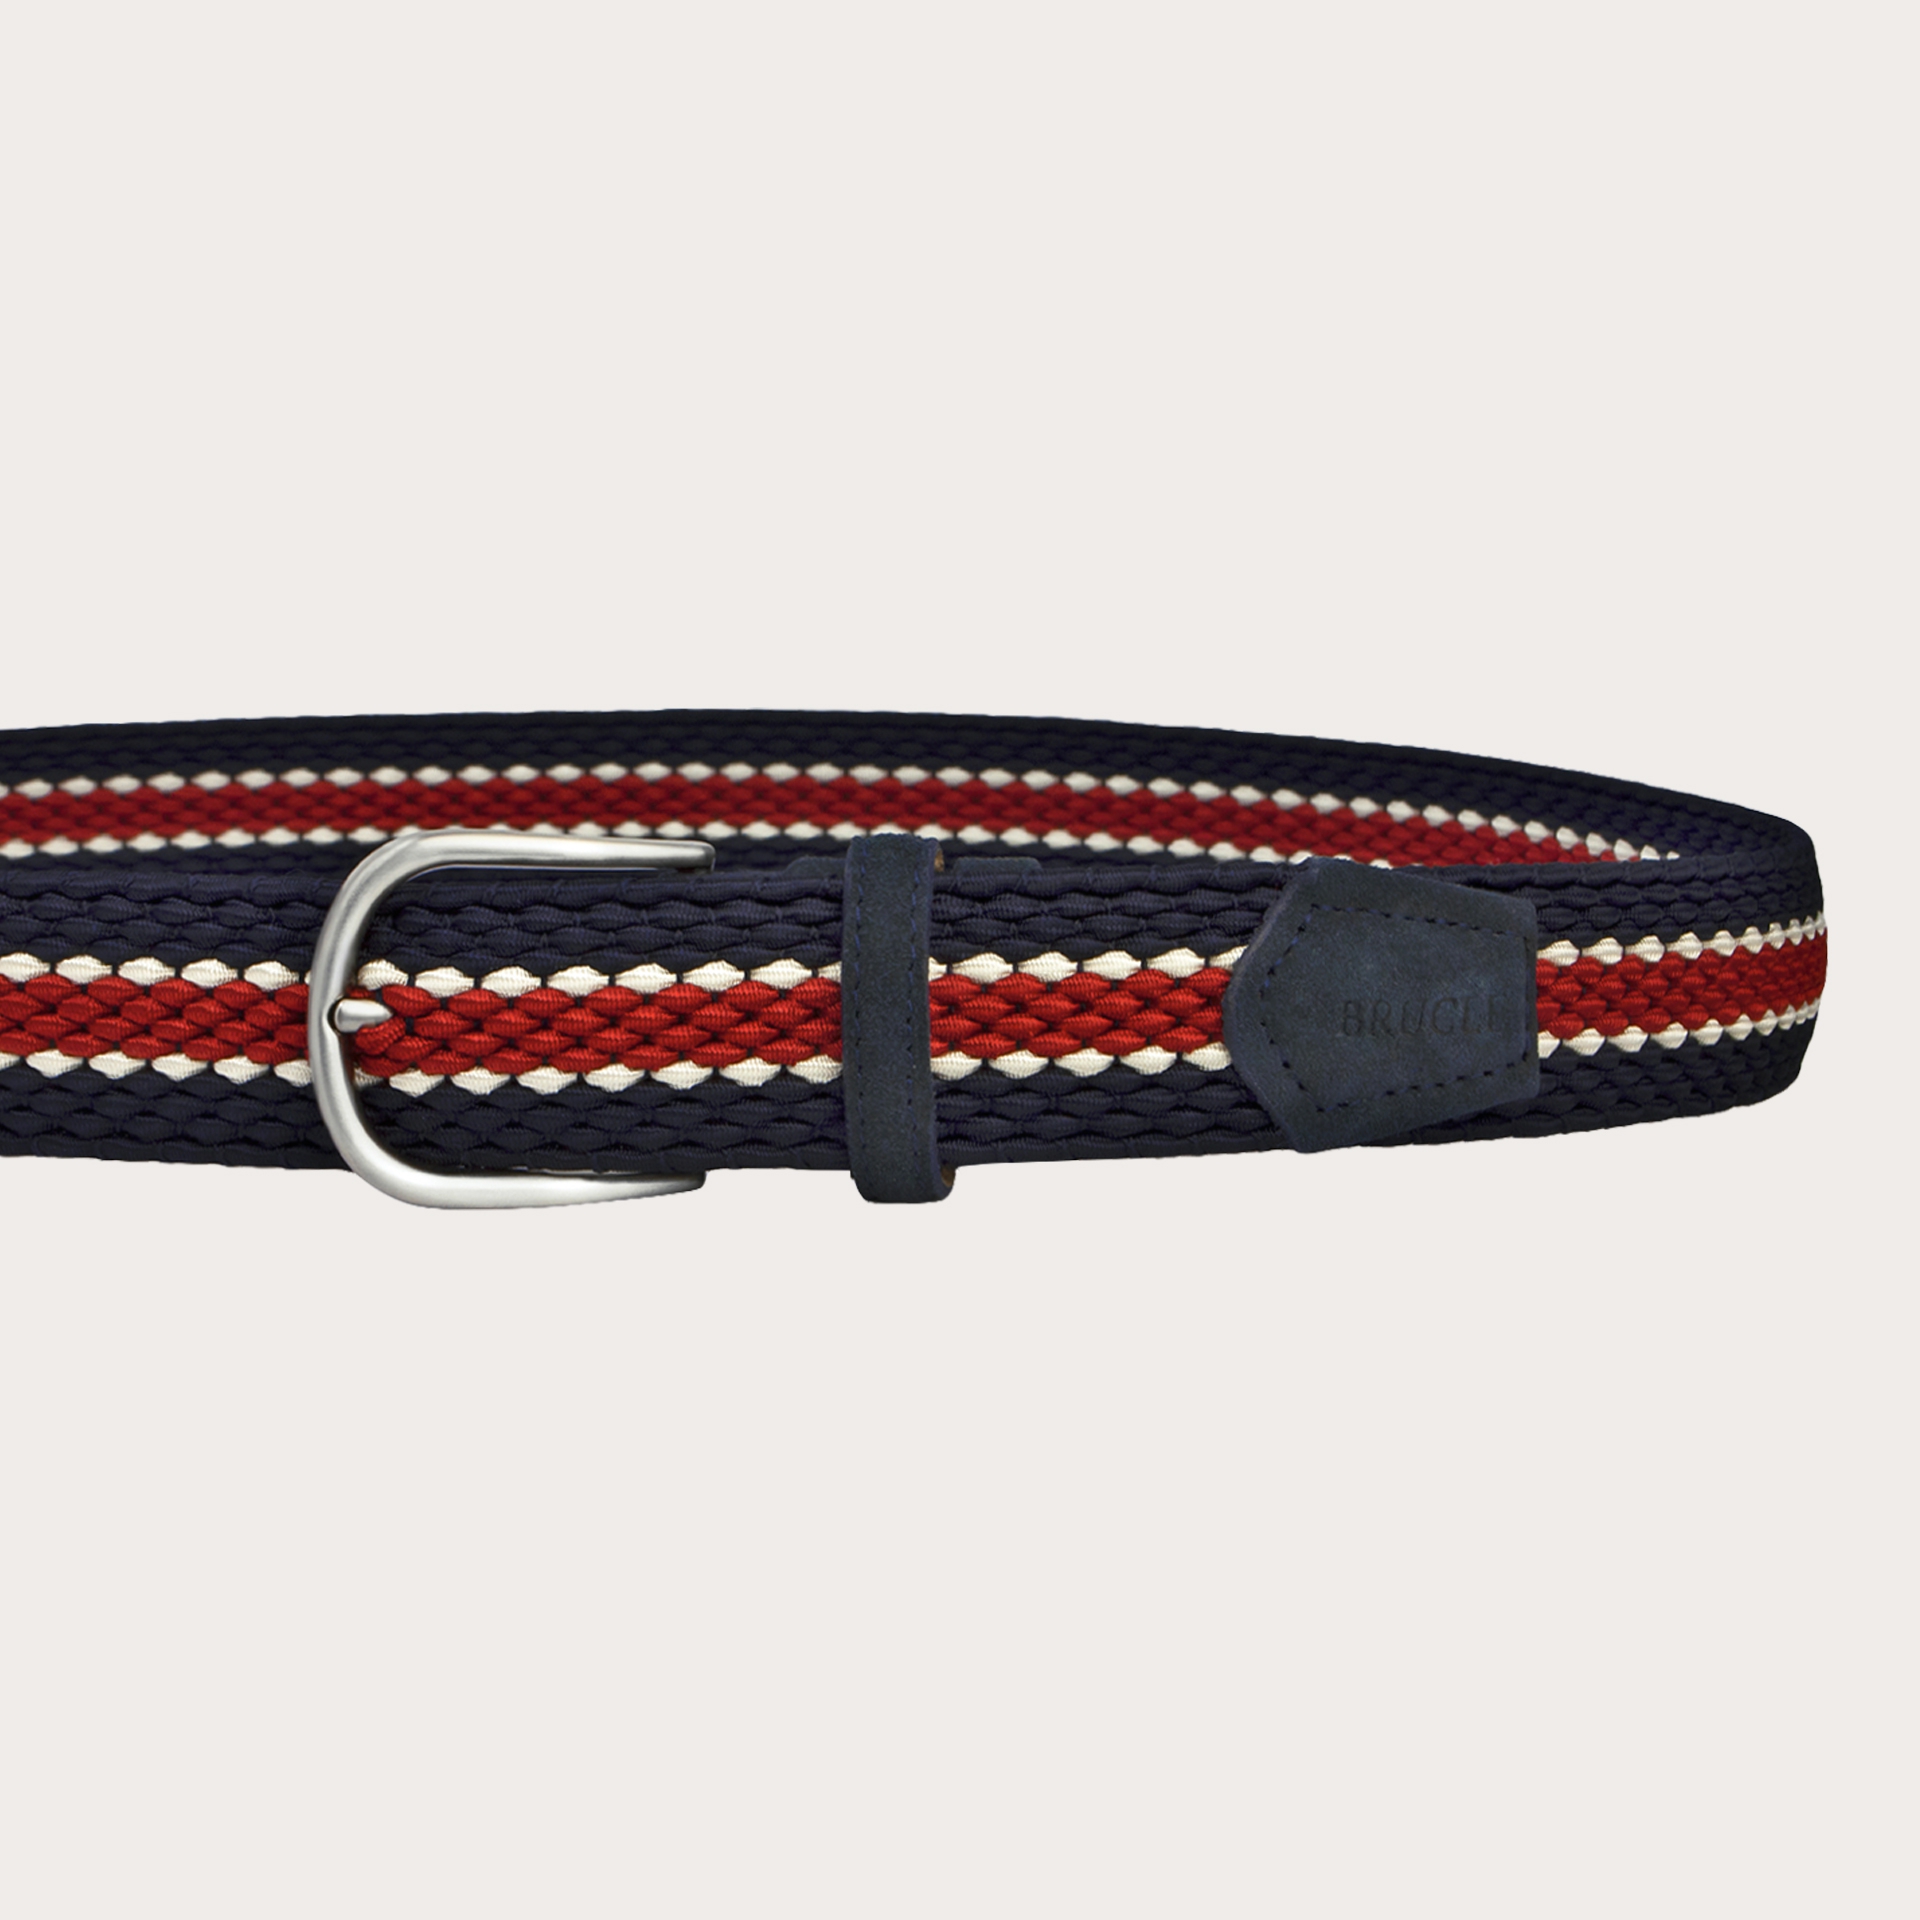 Braided elastic stretch belt, blue red and white